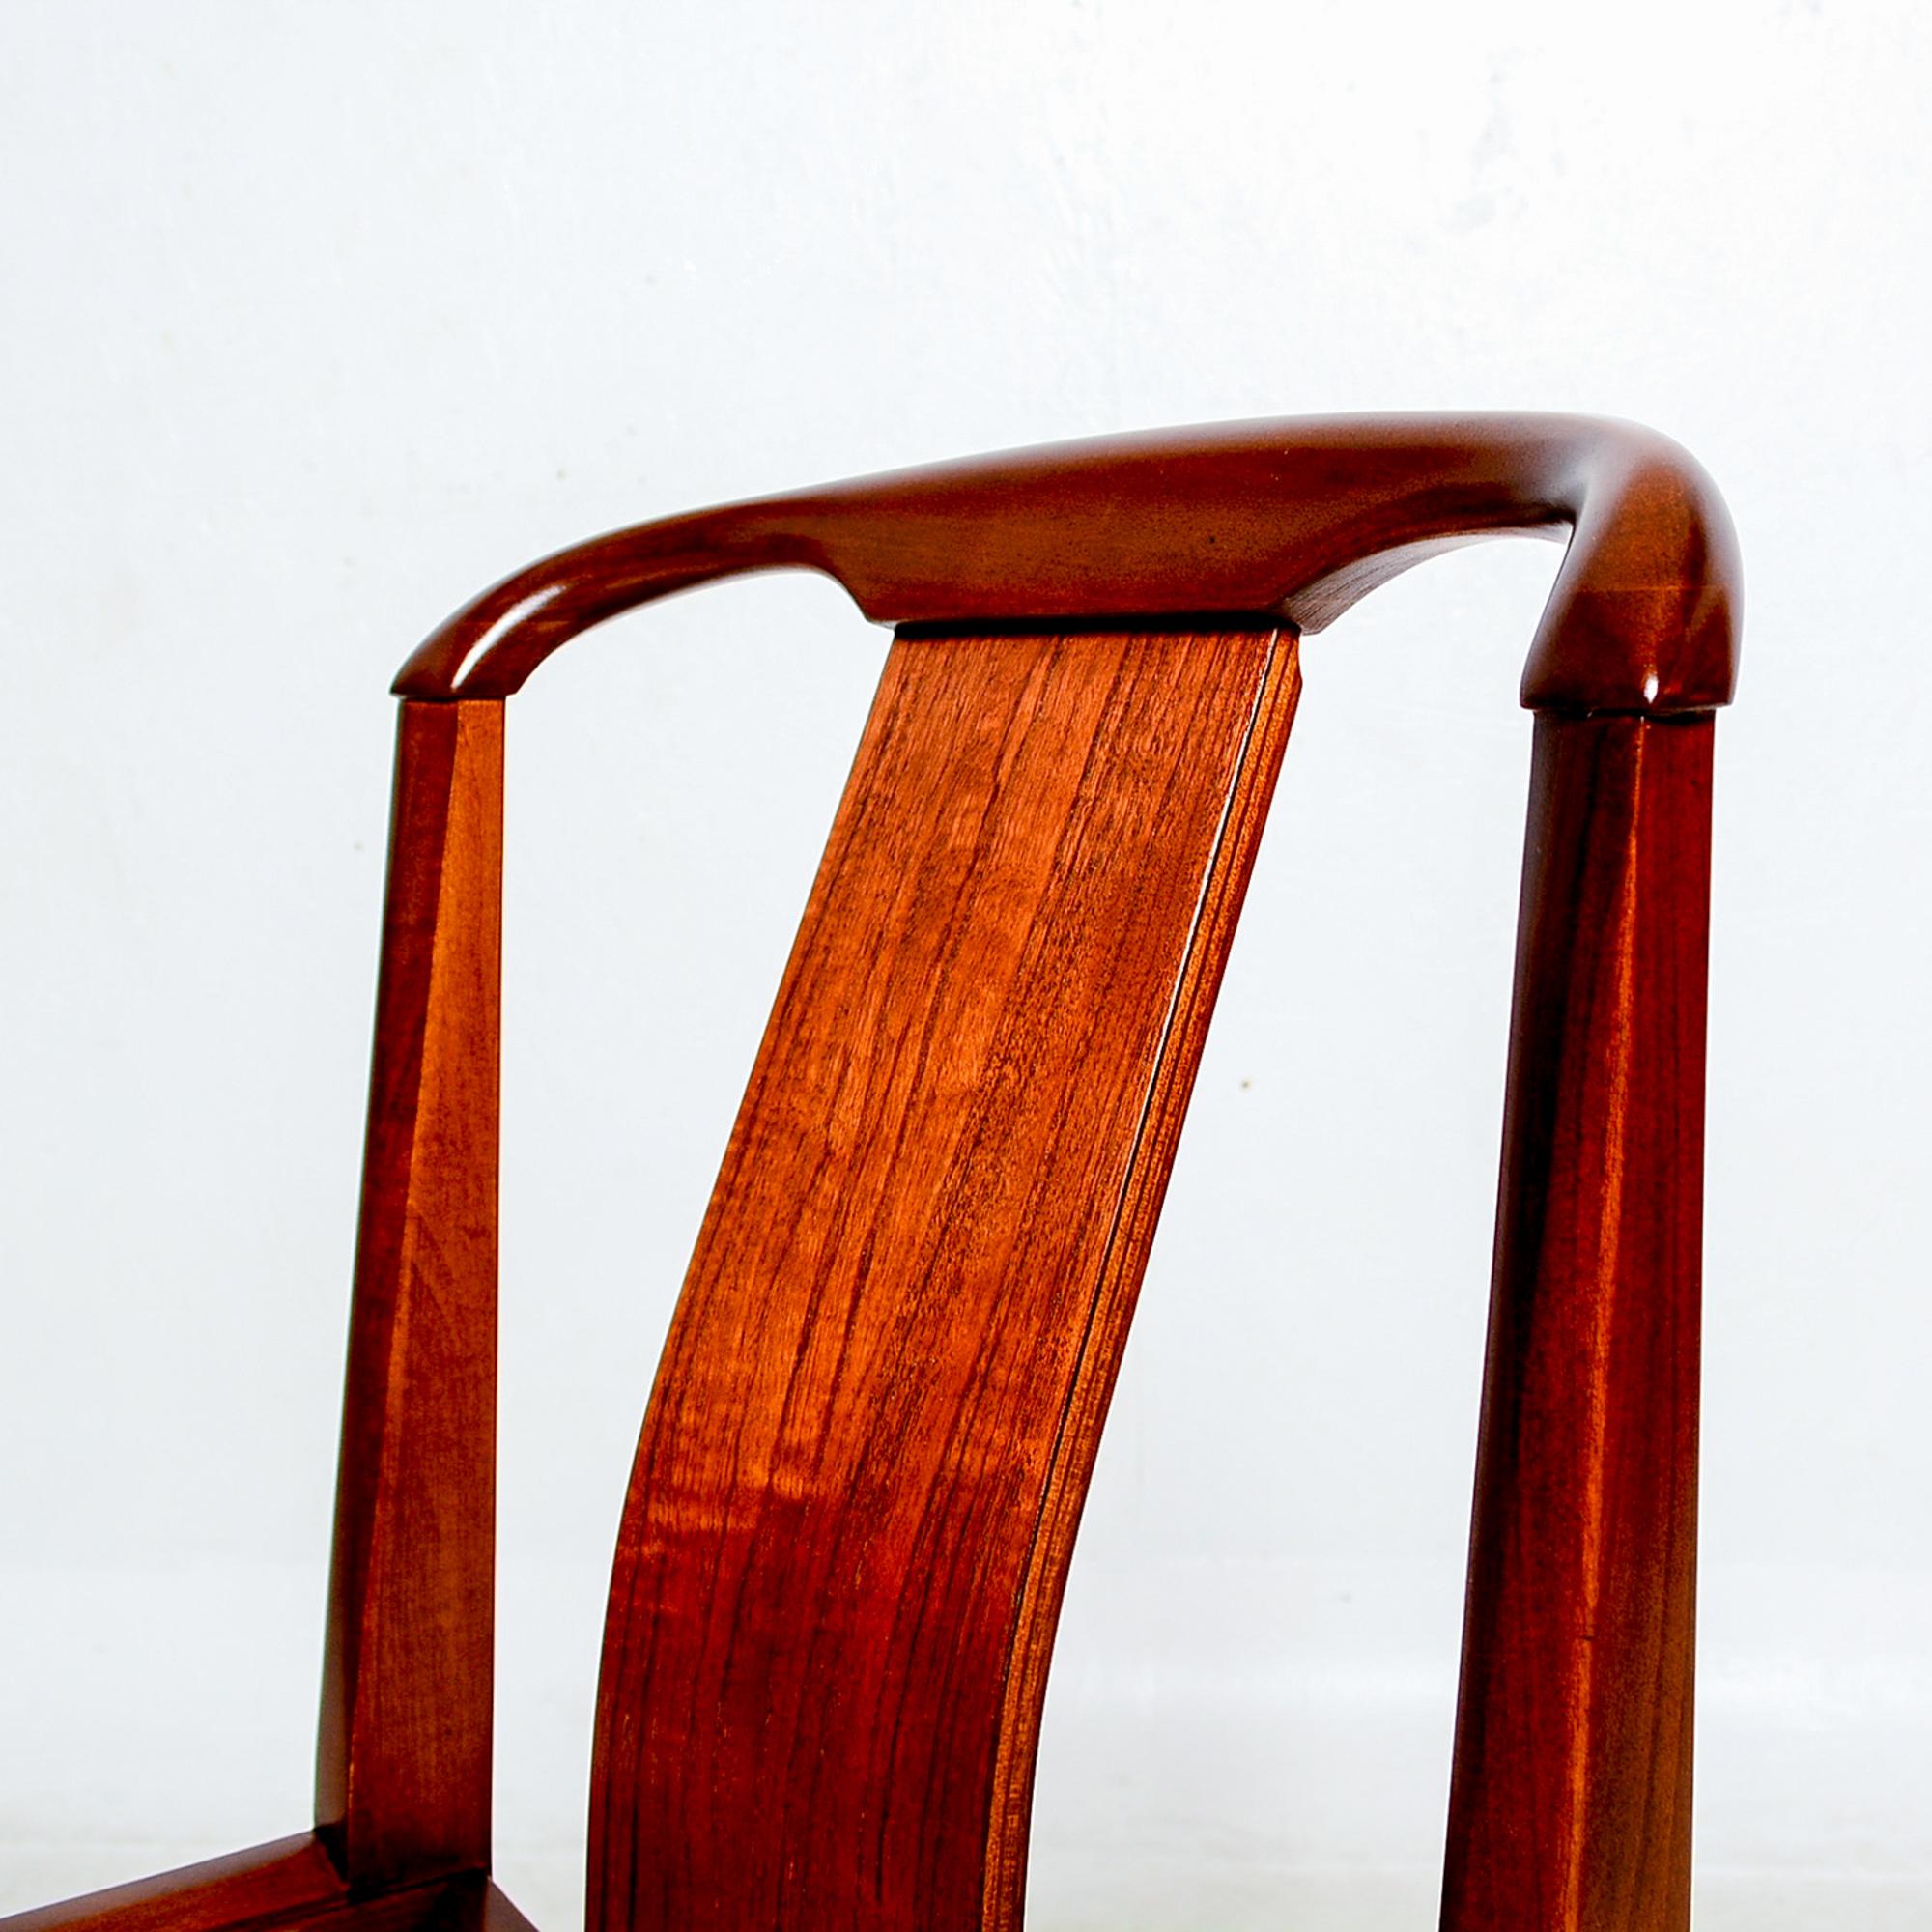 American Sophisticated Baker Sculptural Walnut Wood Dining Chairs by Michael Taylor 1950s